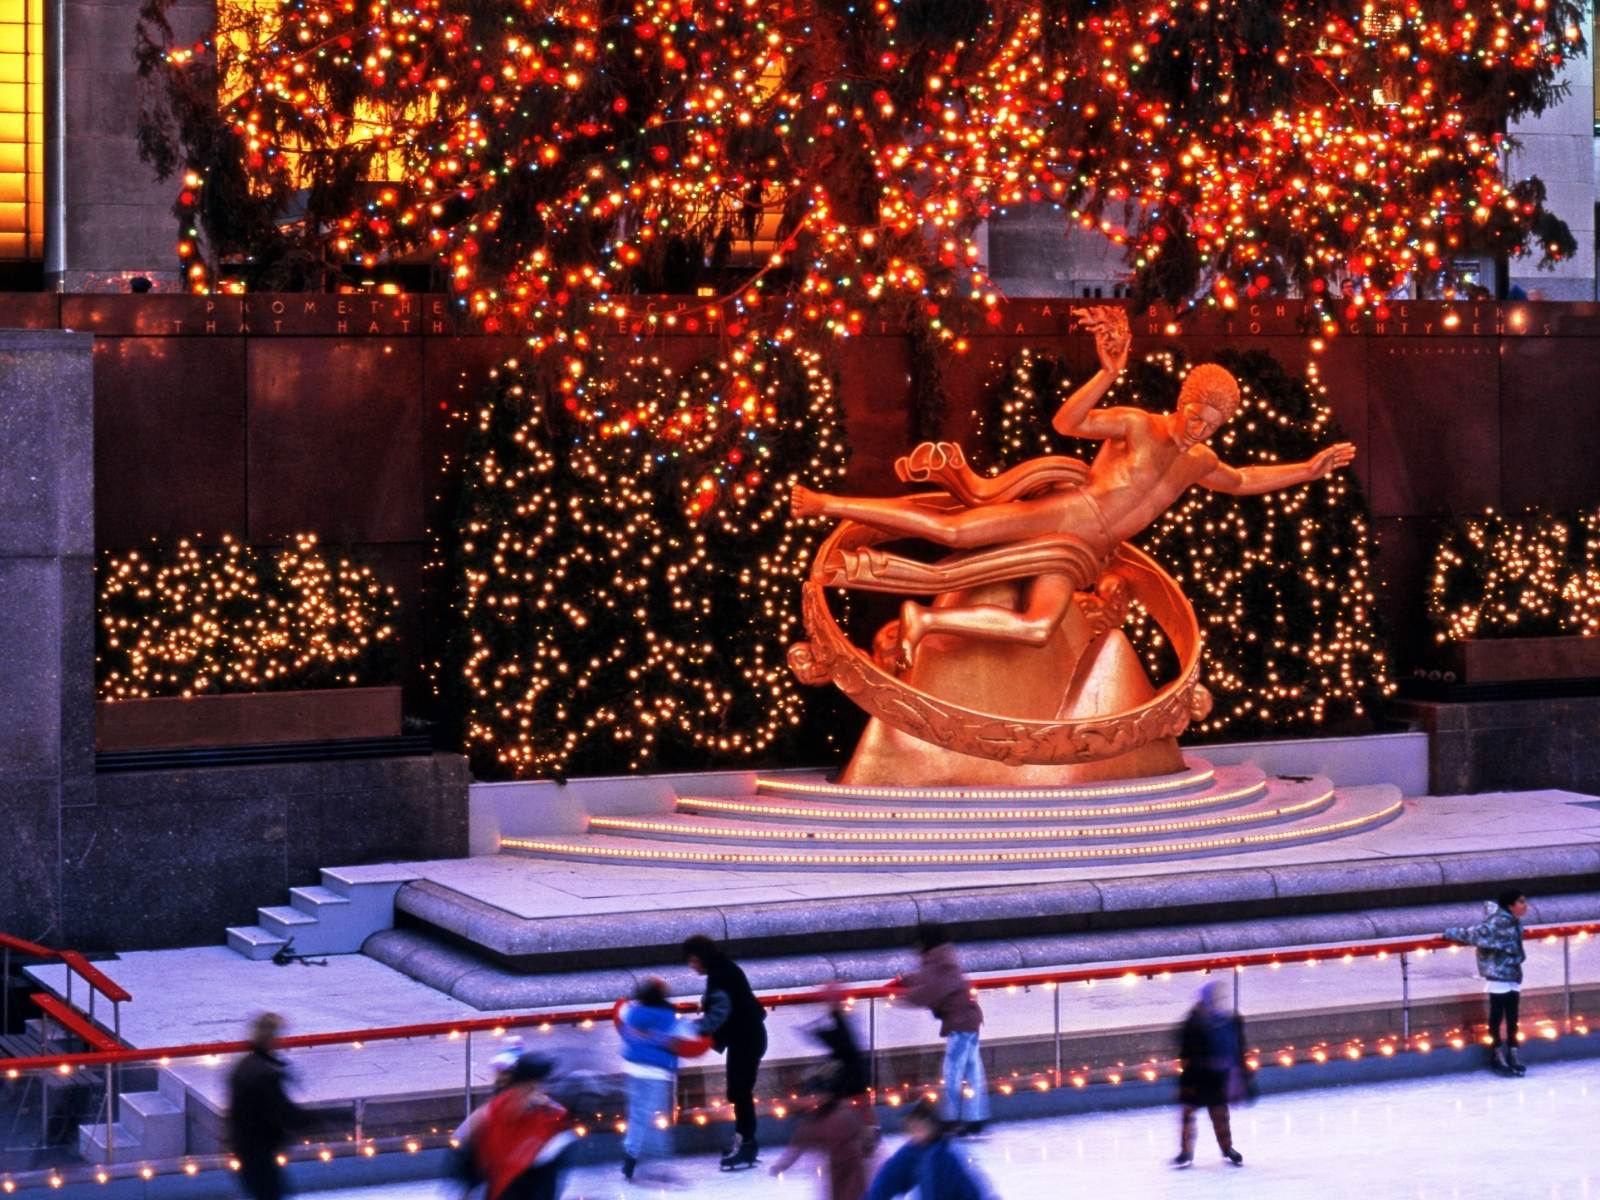 The Best Outdoor Ice Skating Rinks in the US, from East to West